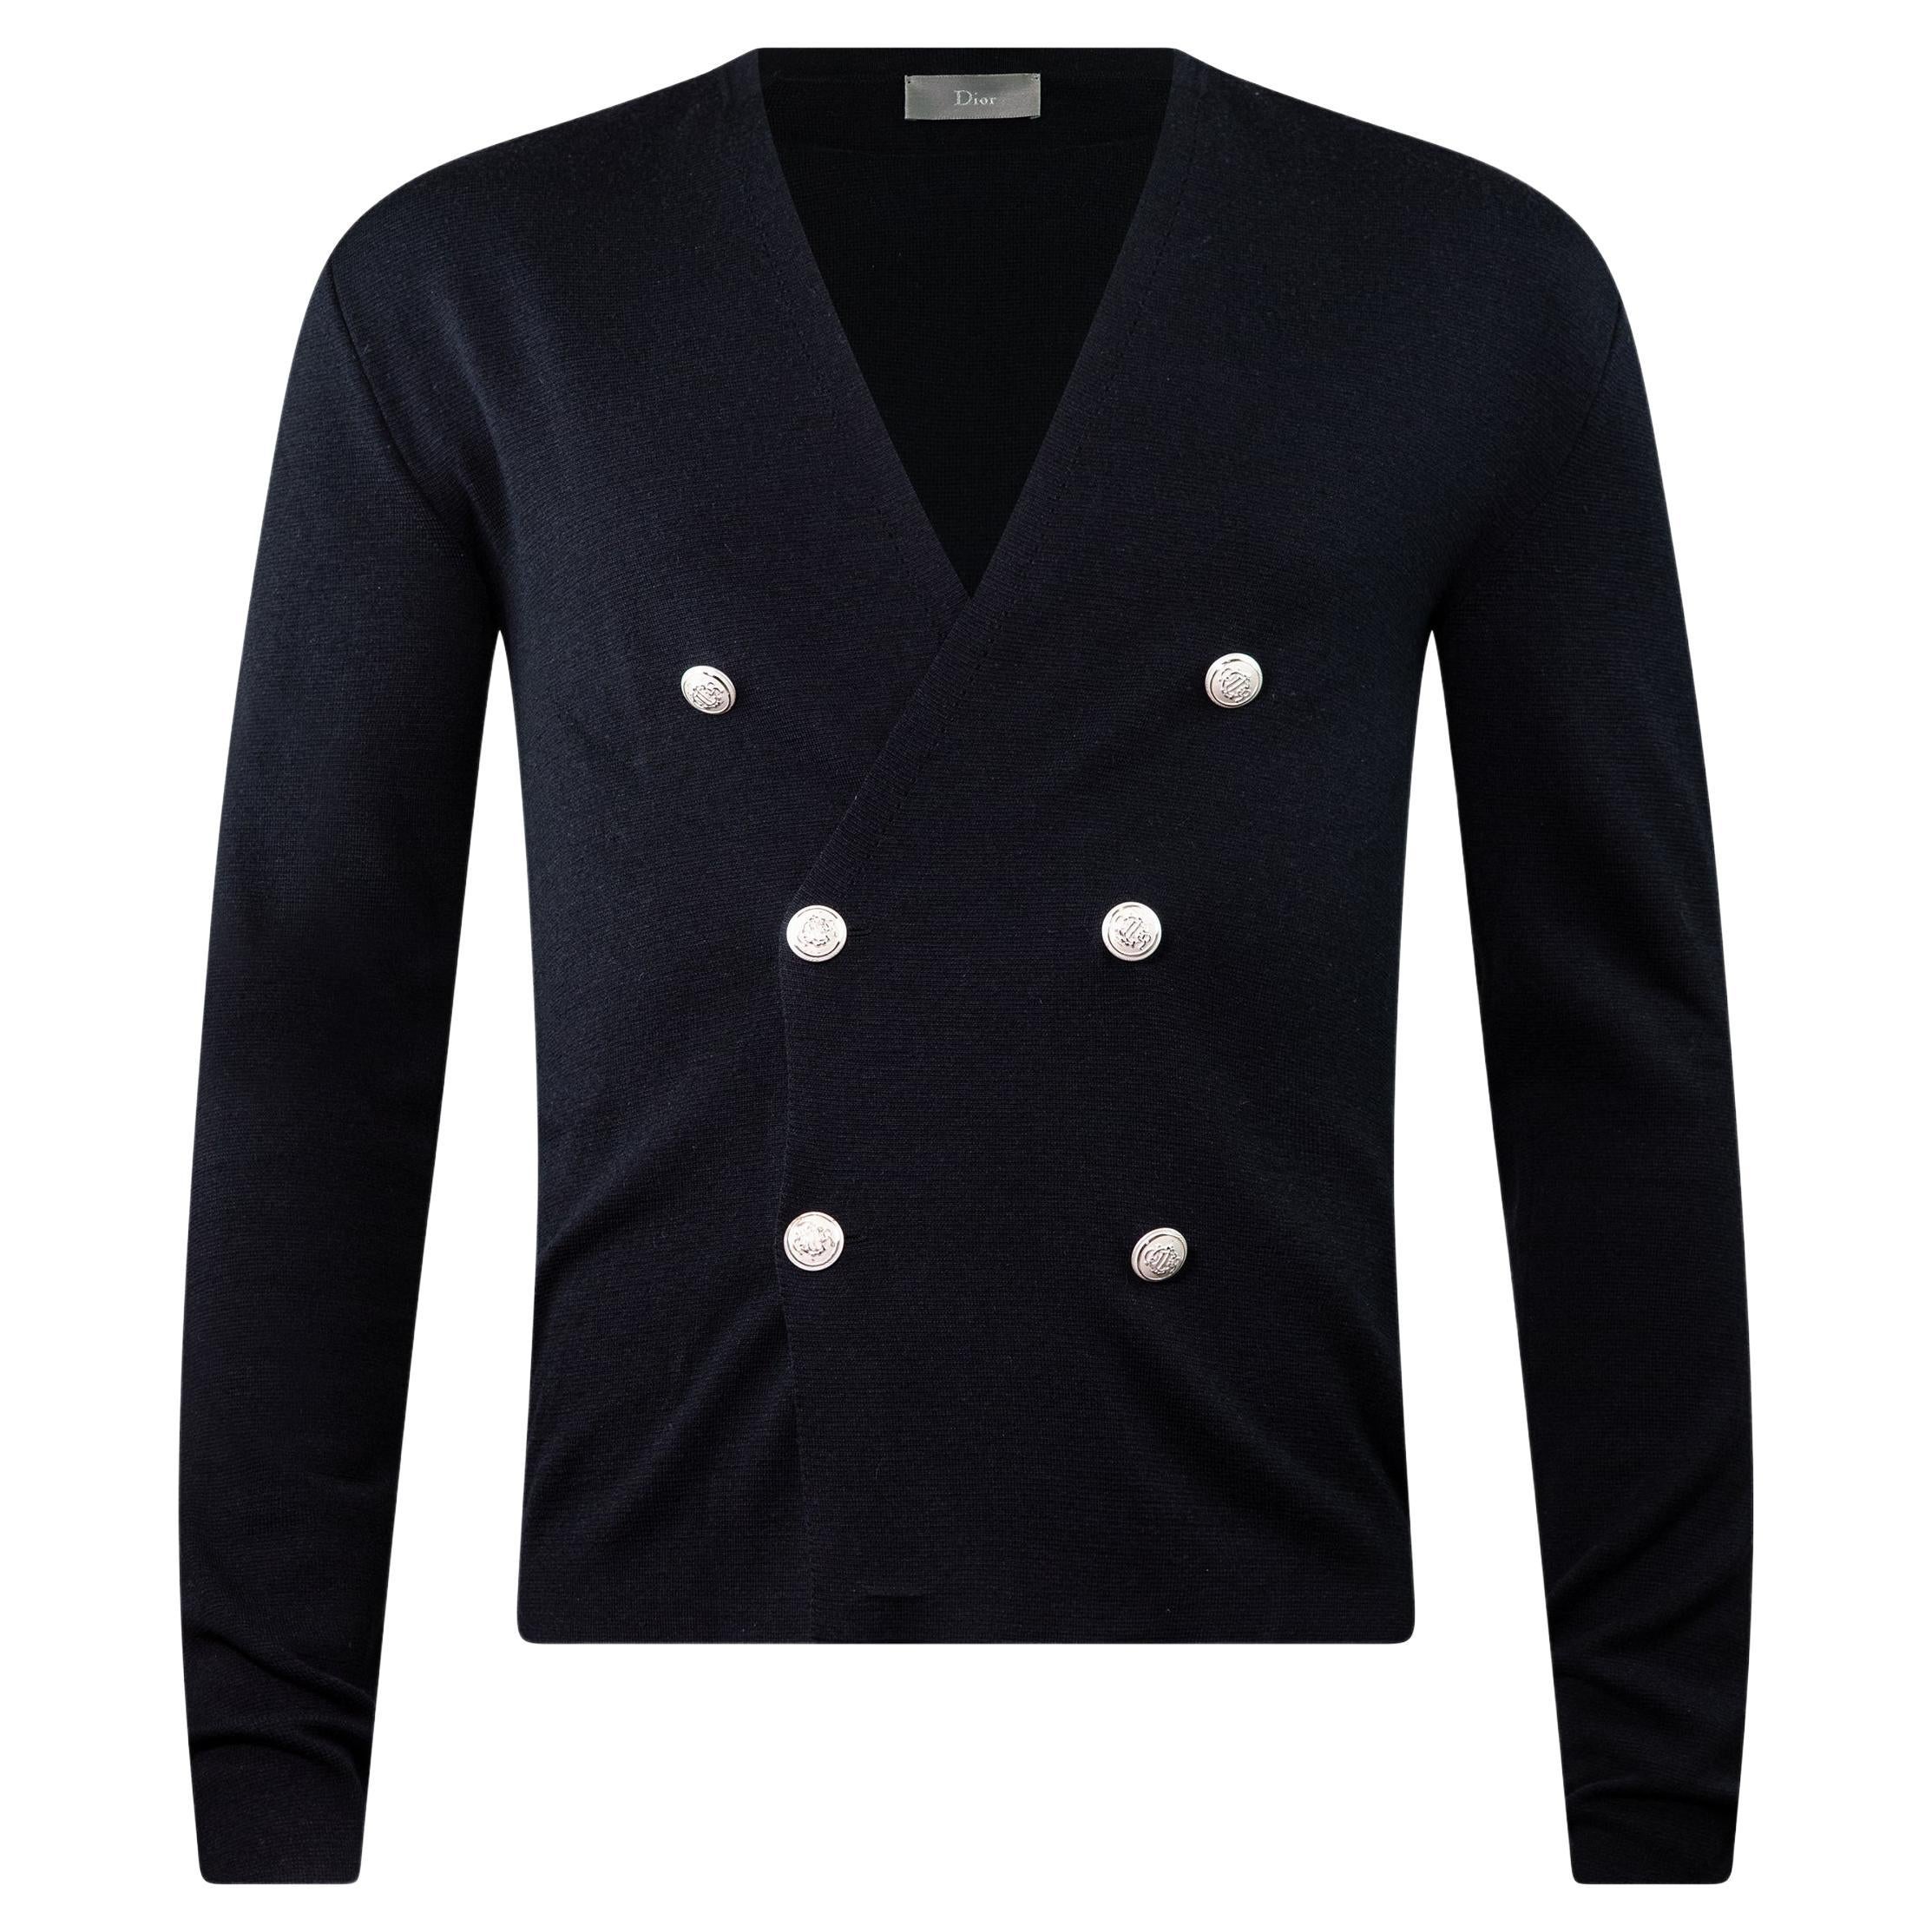 DIOR HOMME By KRIS VAN ASSCHE F/W 2013 Double-breasted Cardigan